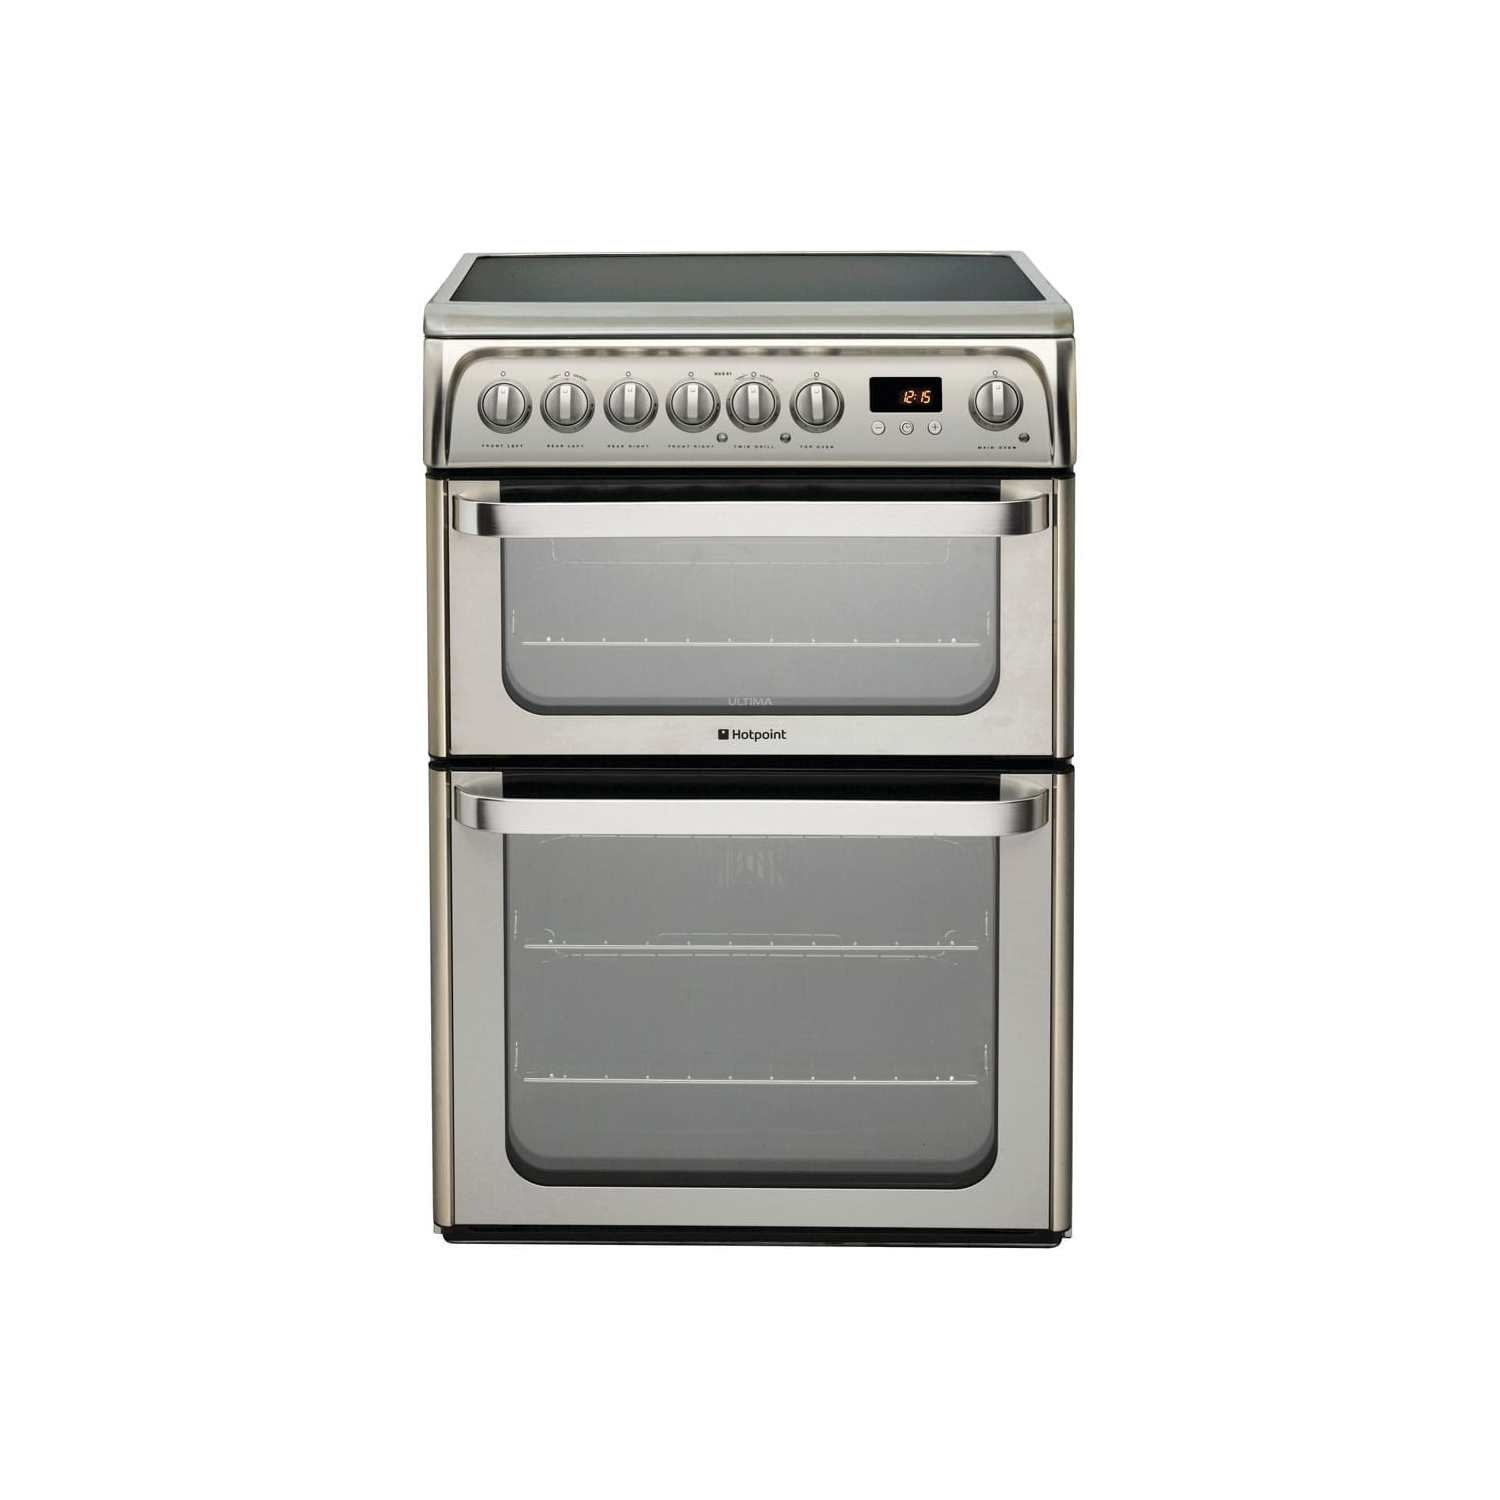 Hotpoint HUE61XS Electric Cooker, Stainless Steel